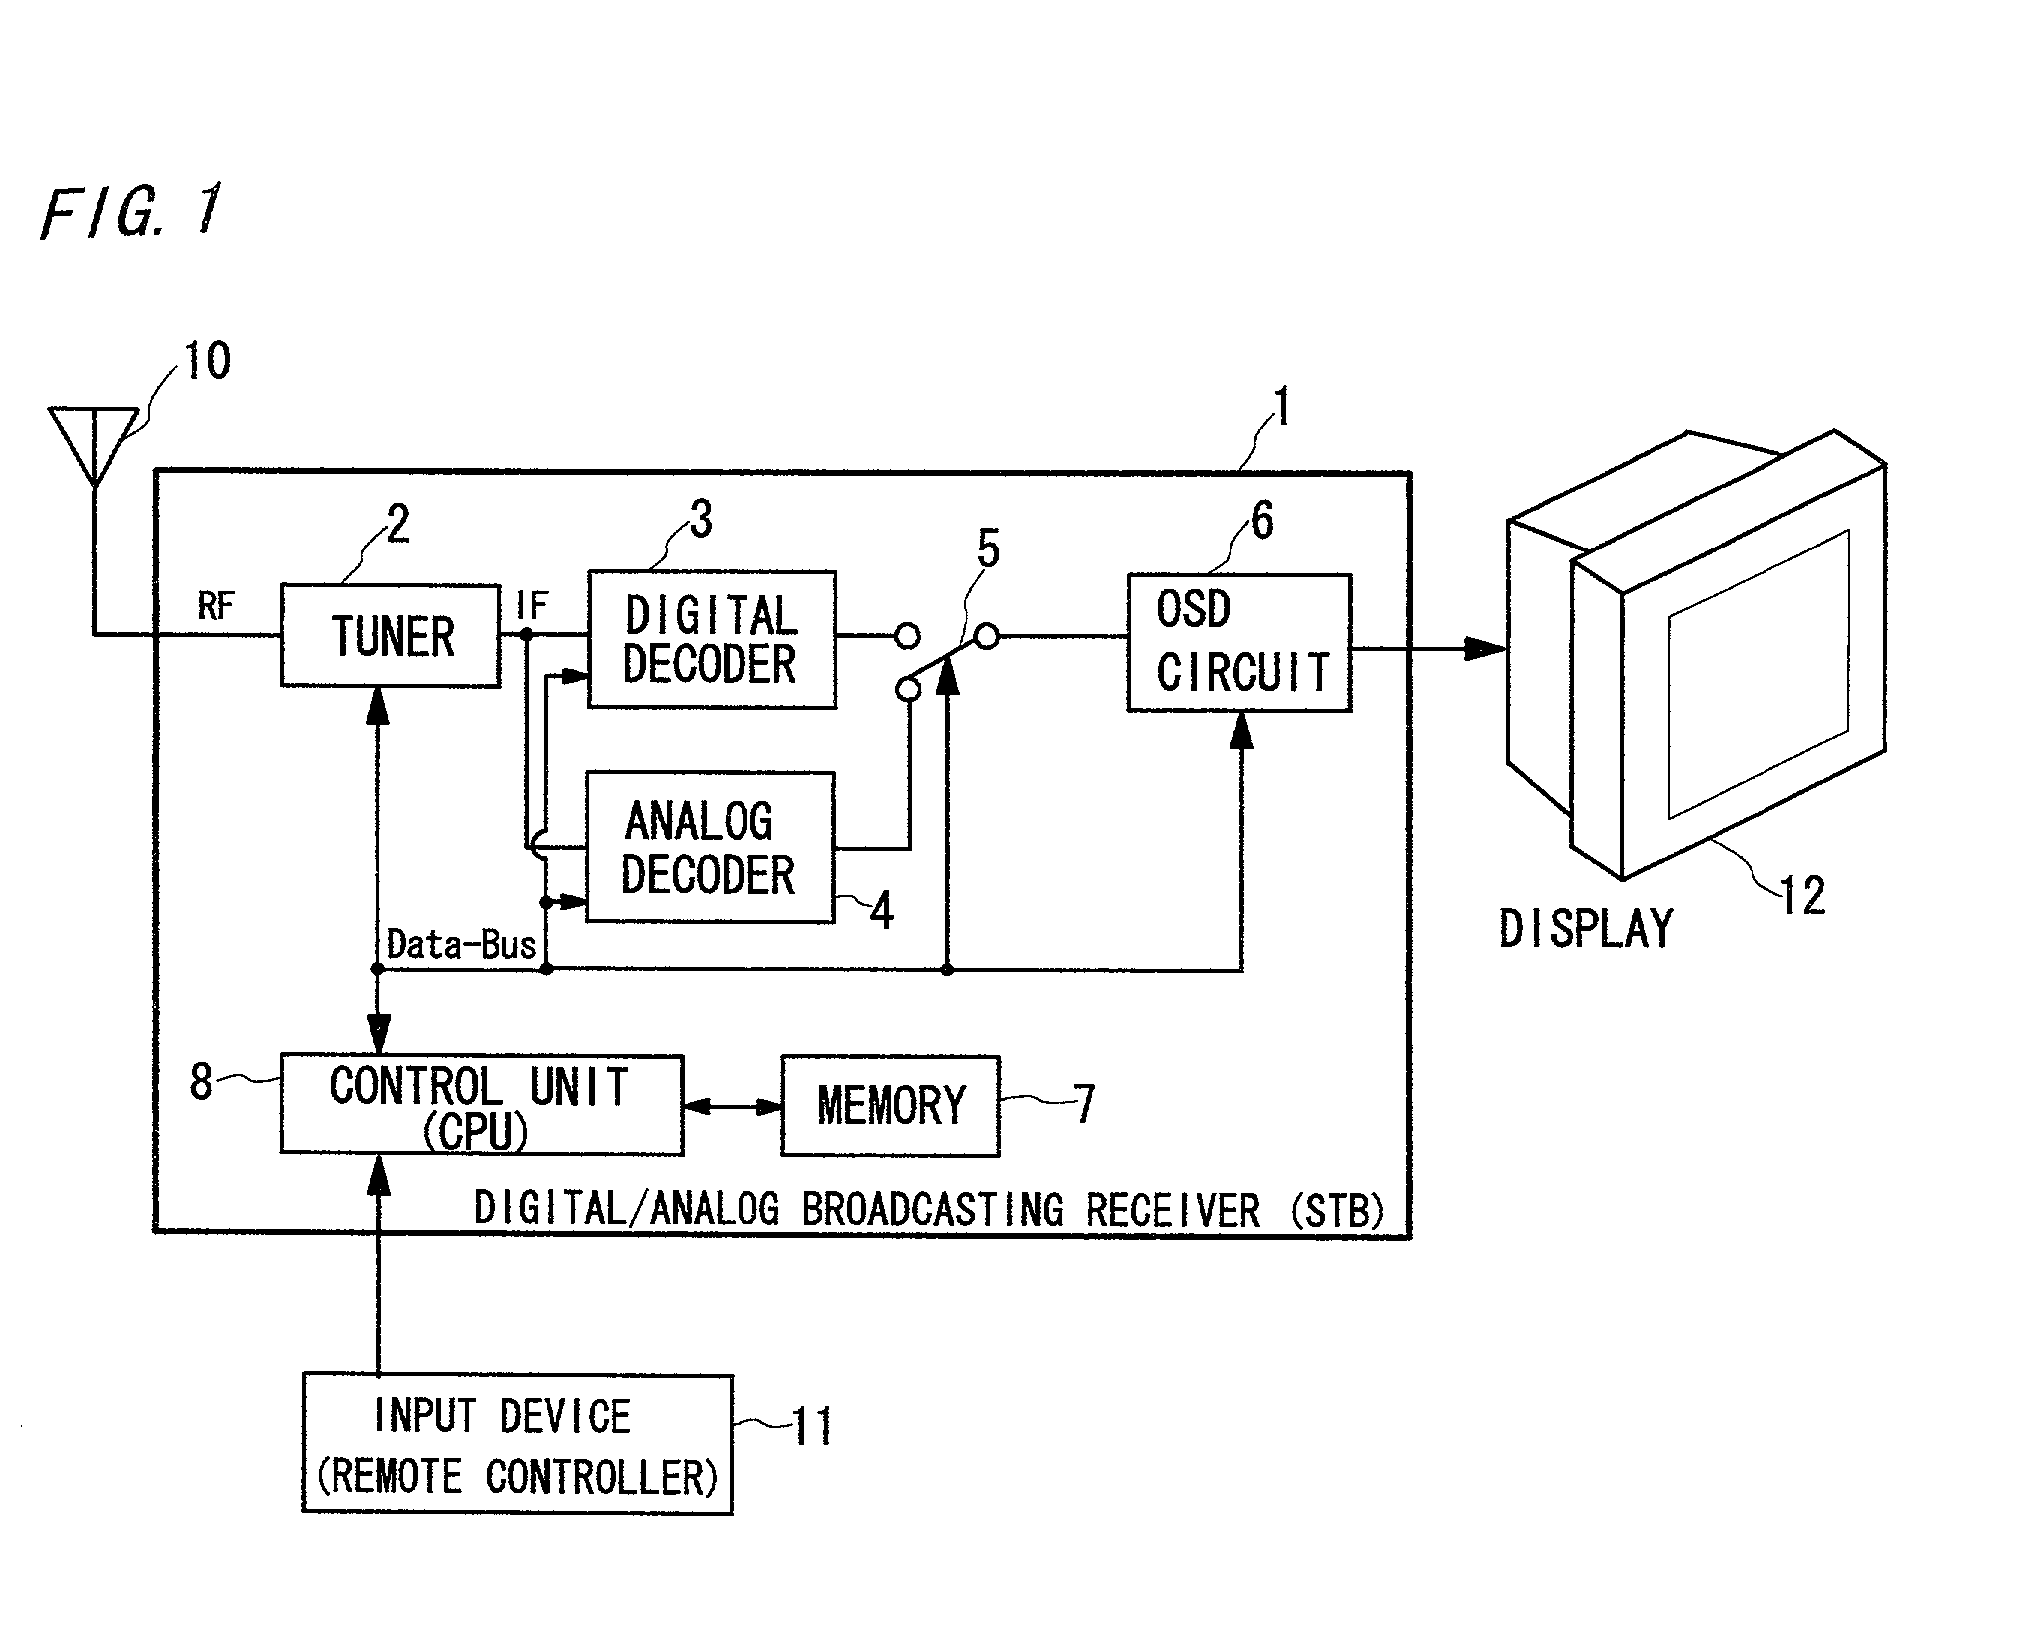 Channel selection device used in digital/analog broadcasting receiver